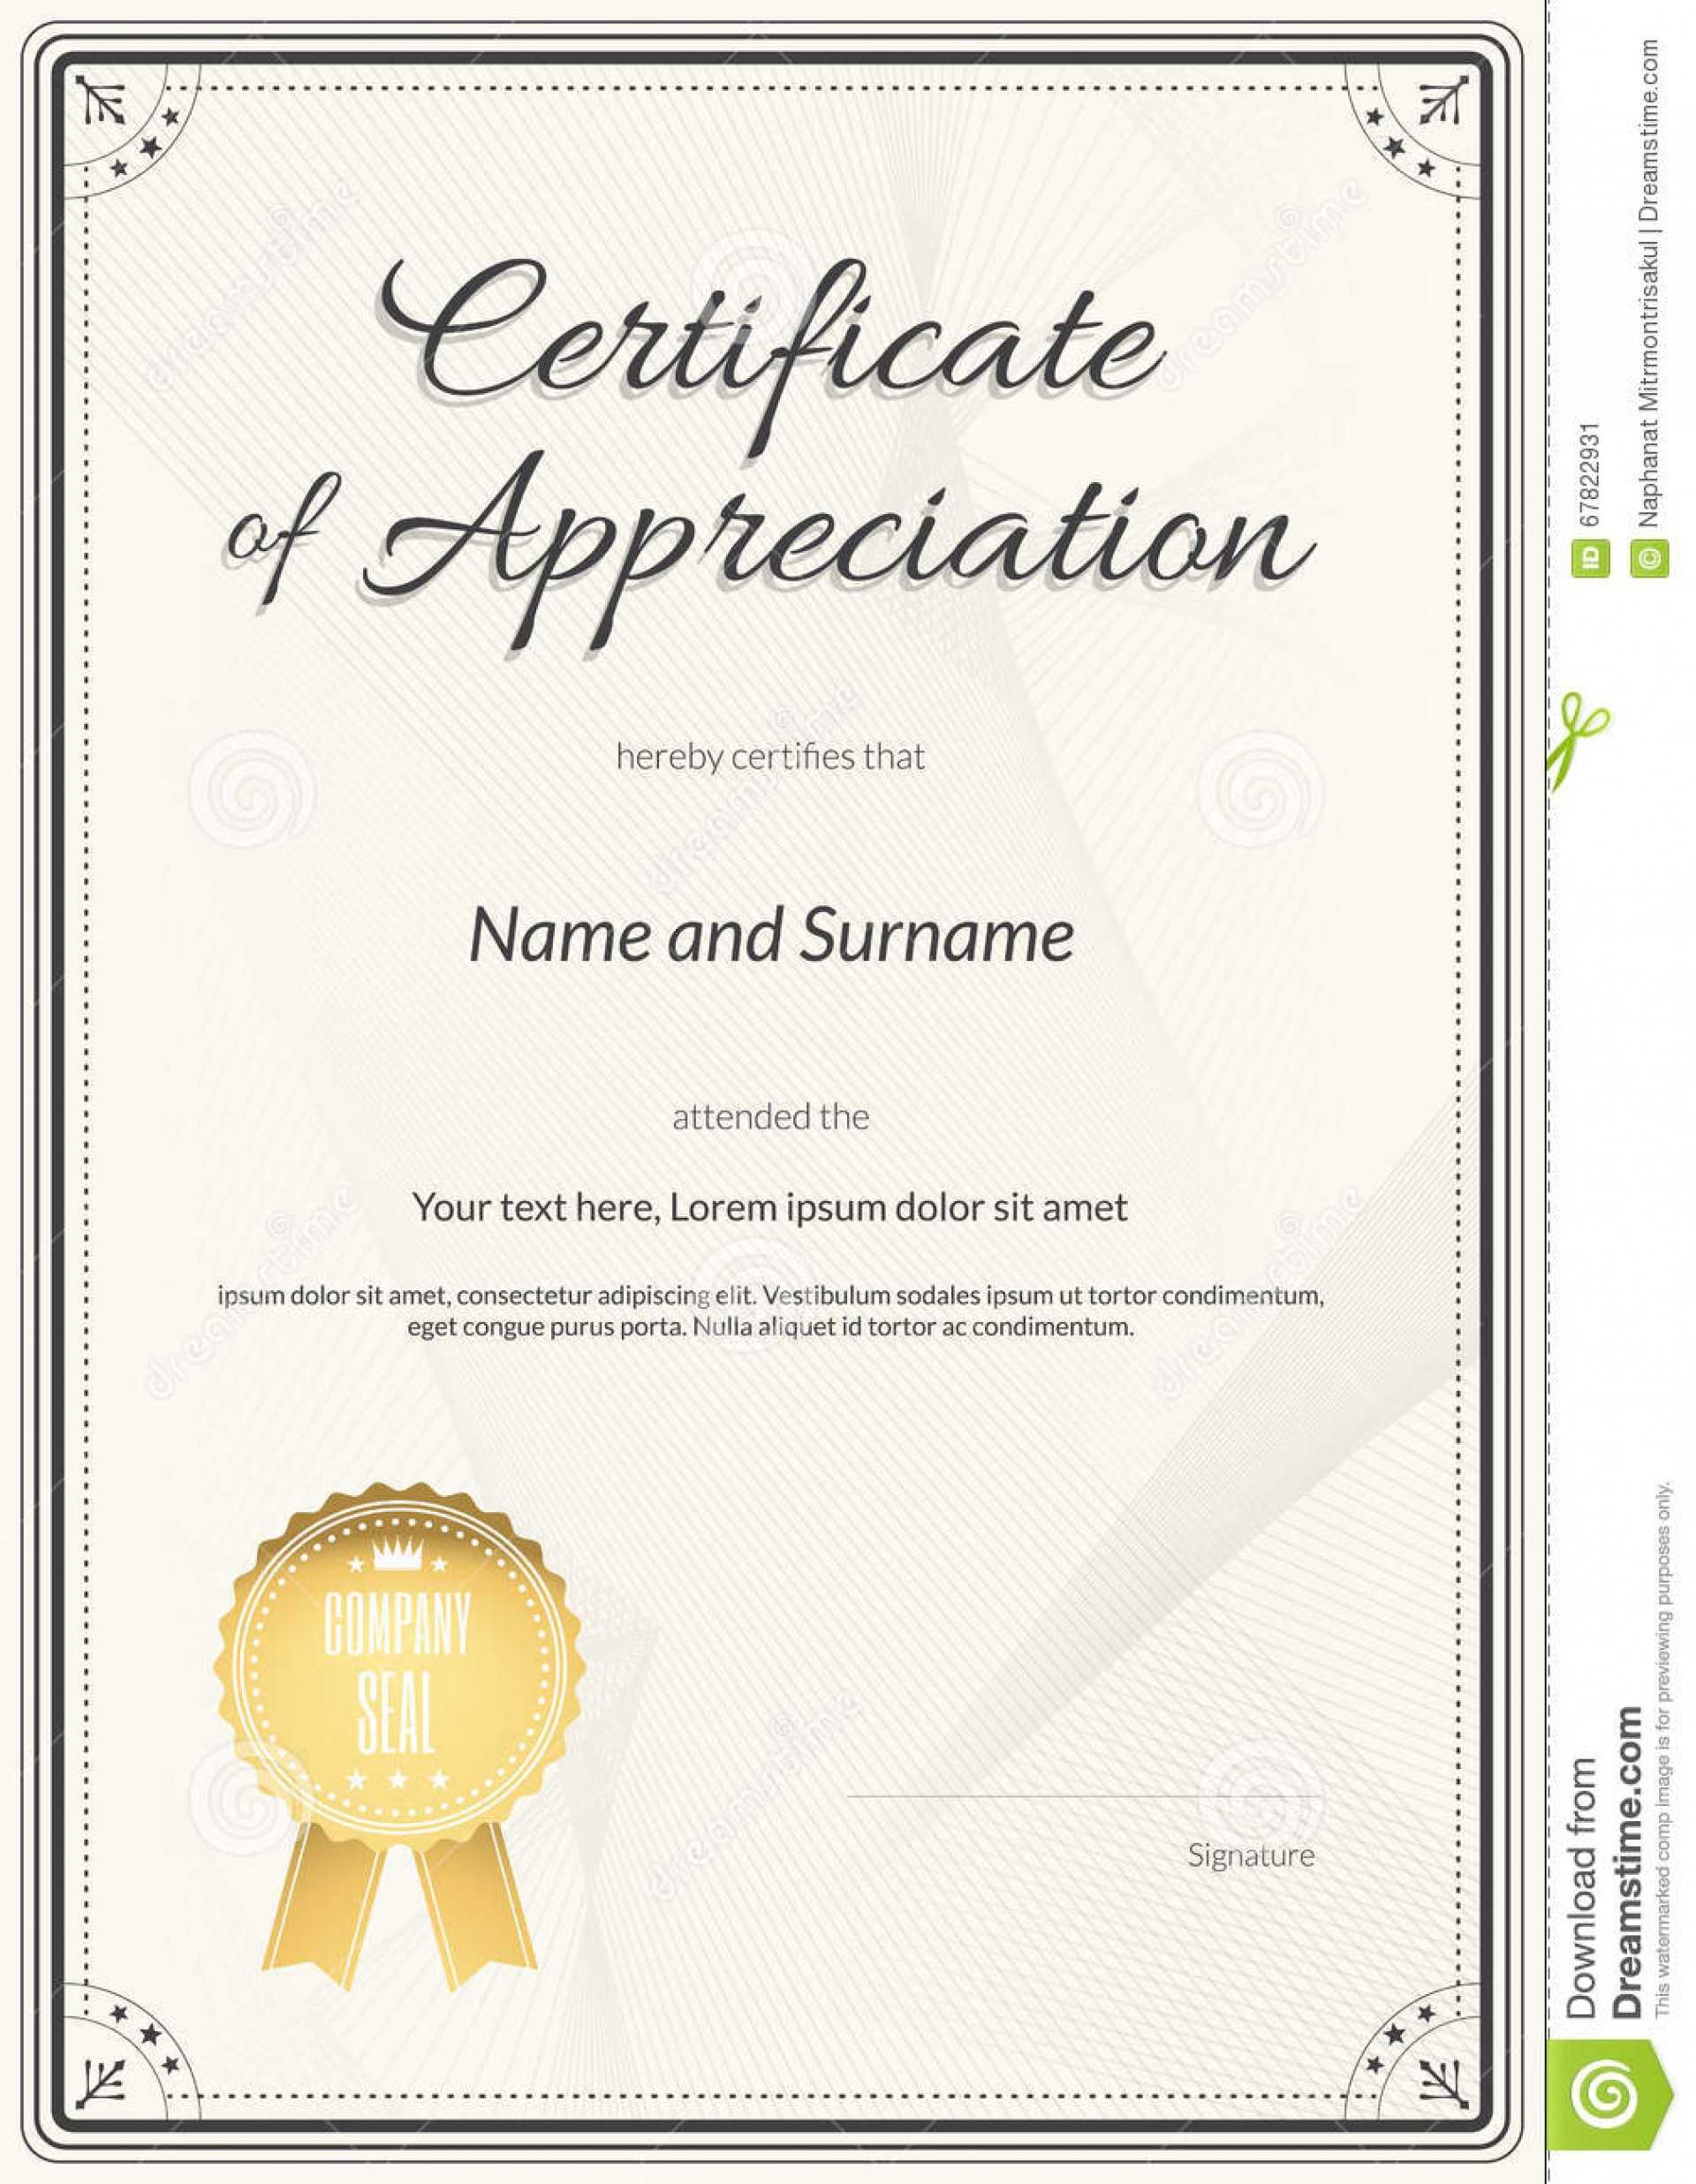 Army Certificate Of Appreciation Template Ppt Intended For Army Certificate Of Achievement Template